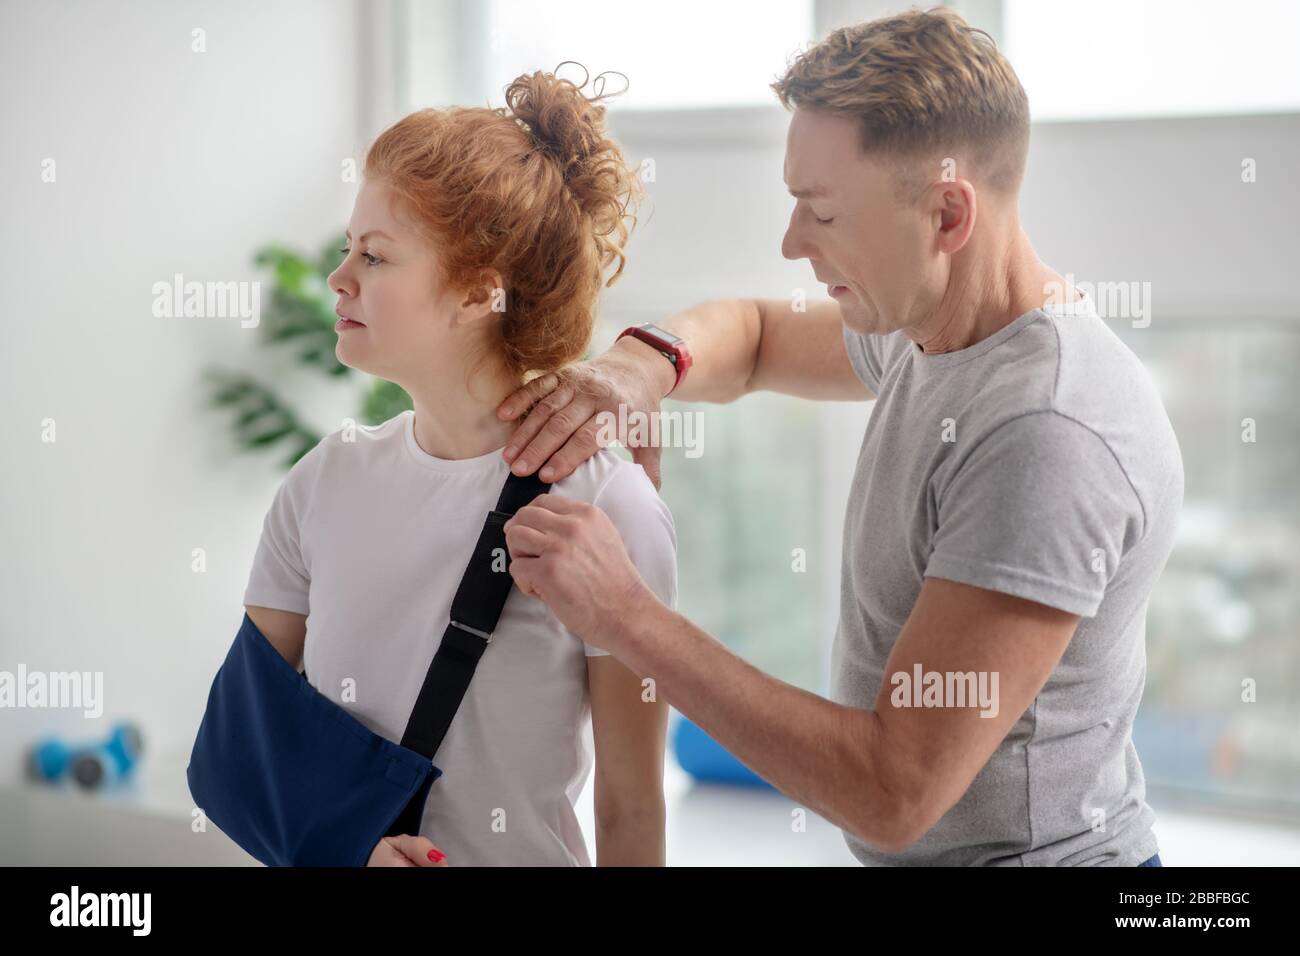 Male physiotherapist examining shoulder of female patient with arm sling Stock Photo